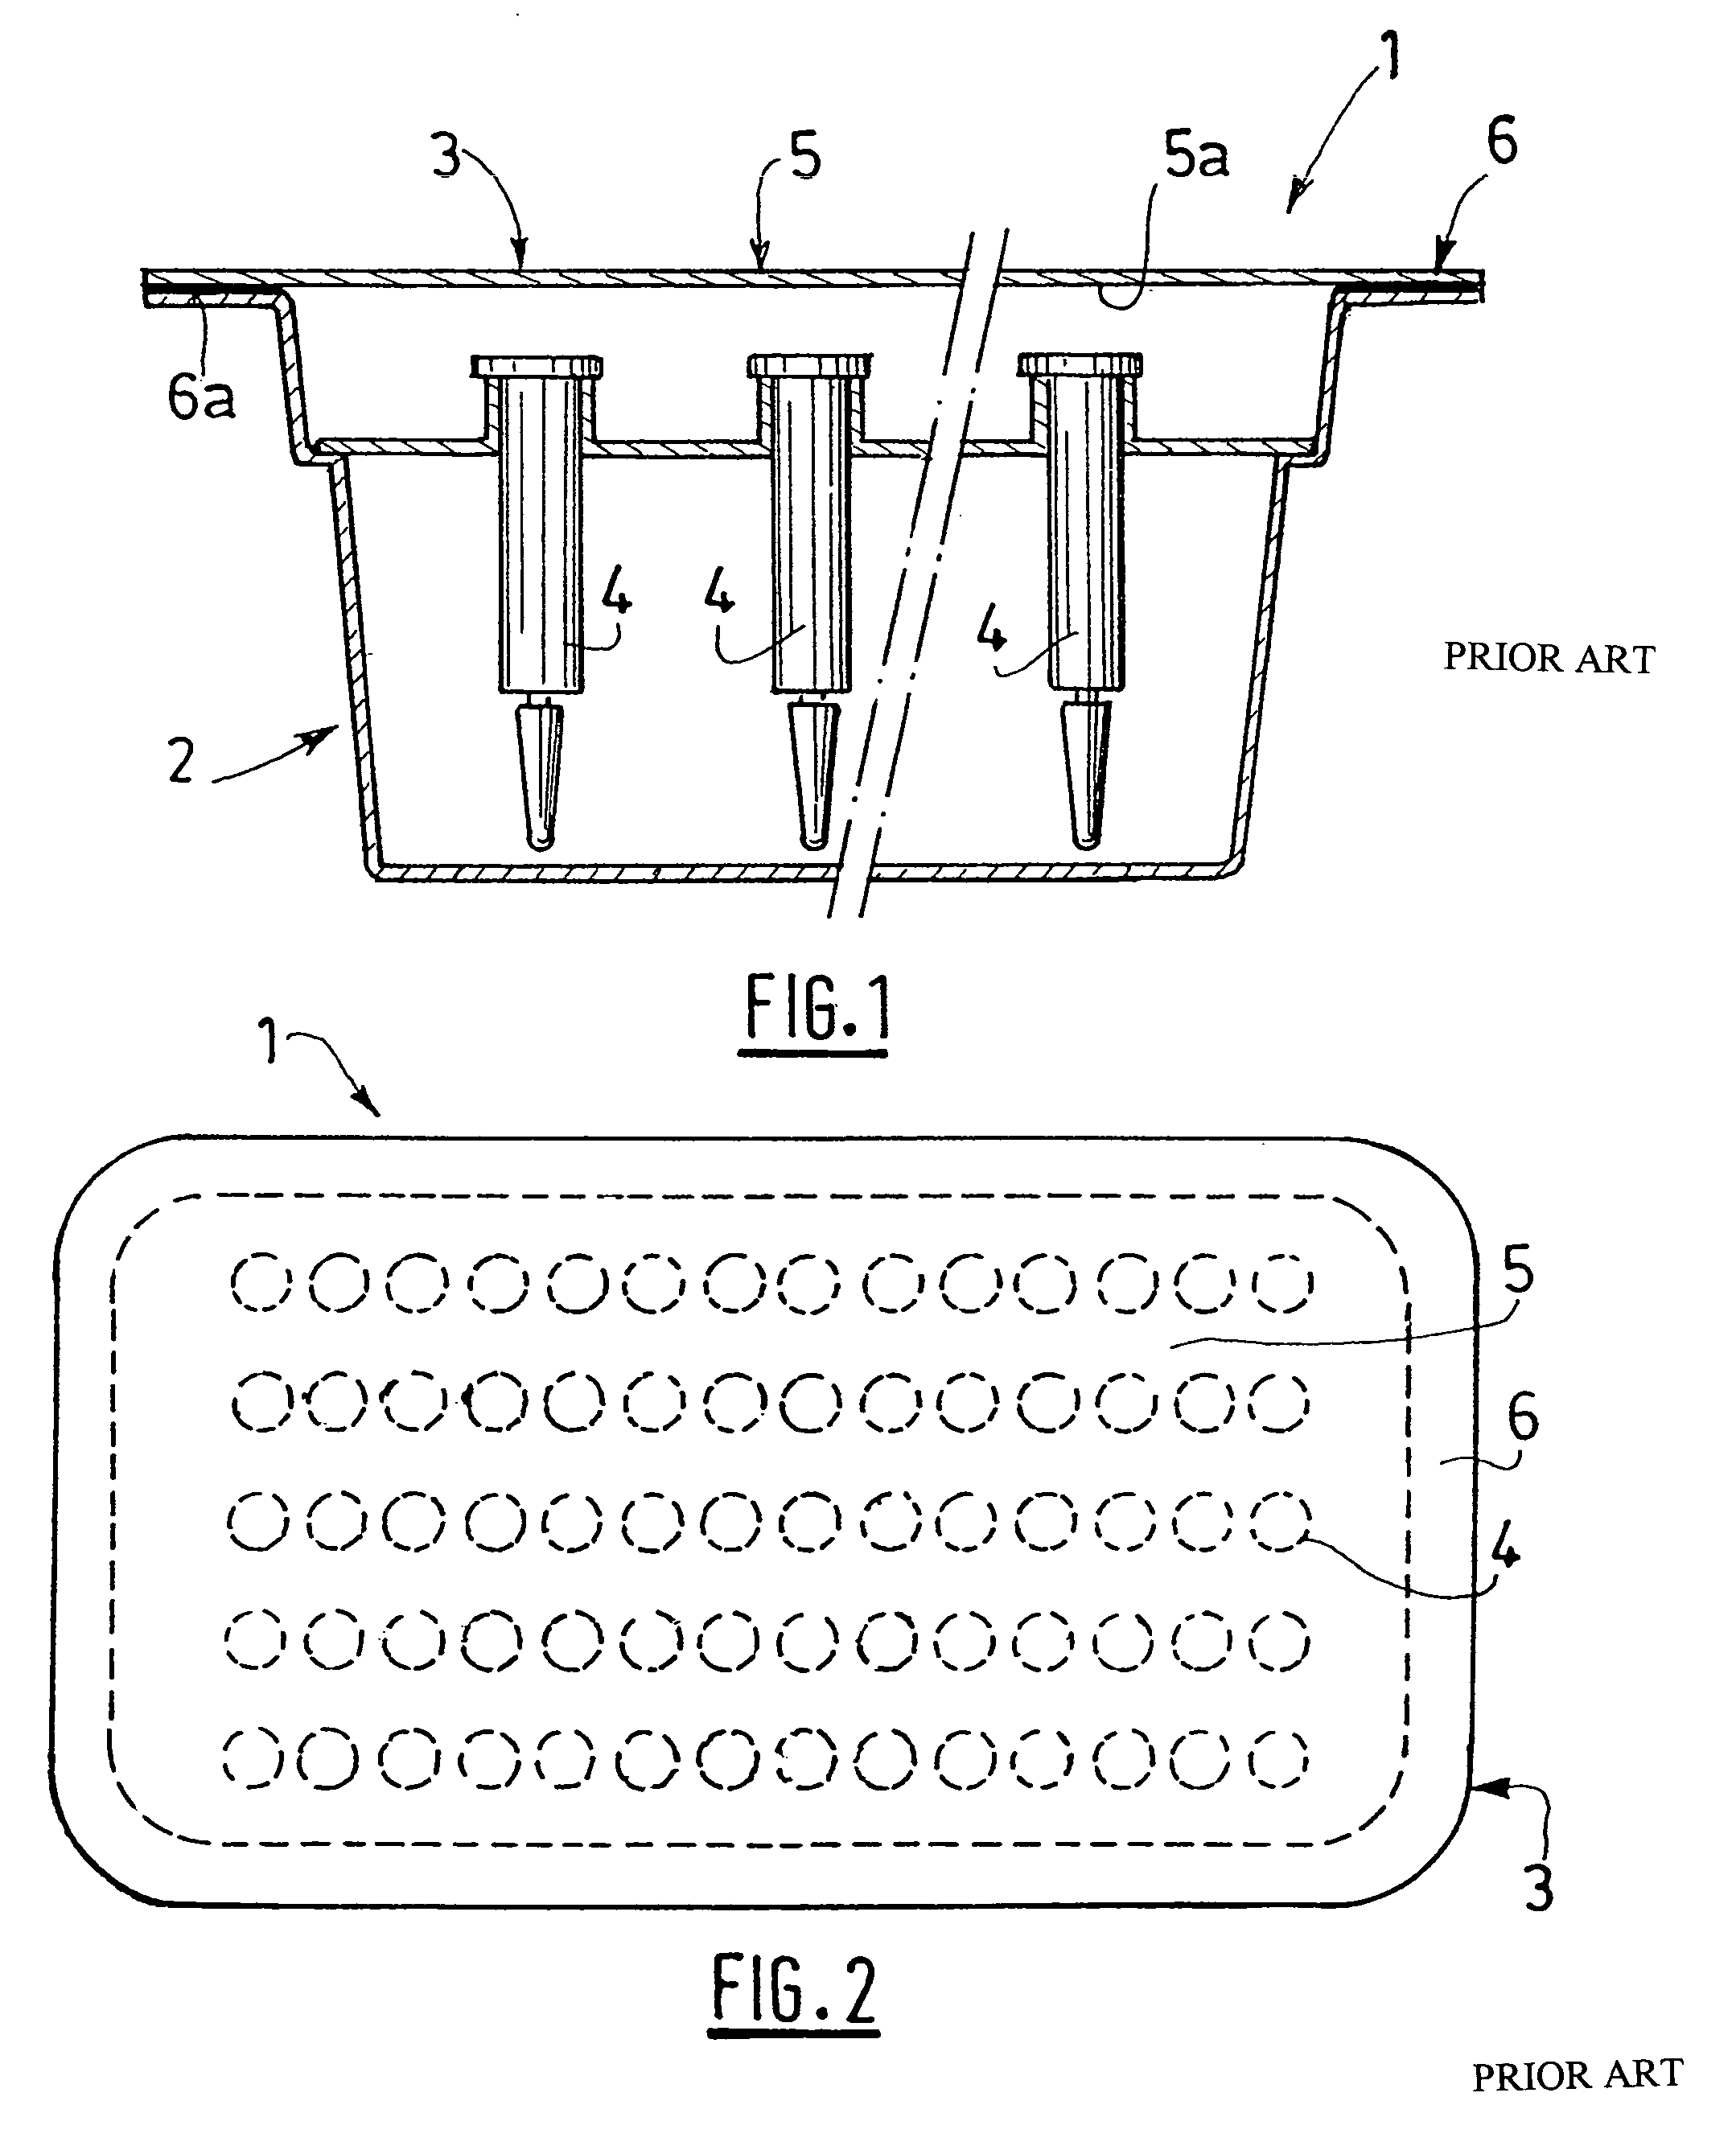 Process for decontamination by radiation of a product such as a packaging containing medical devices